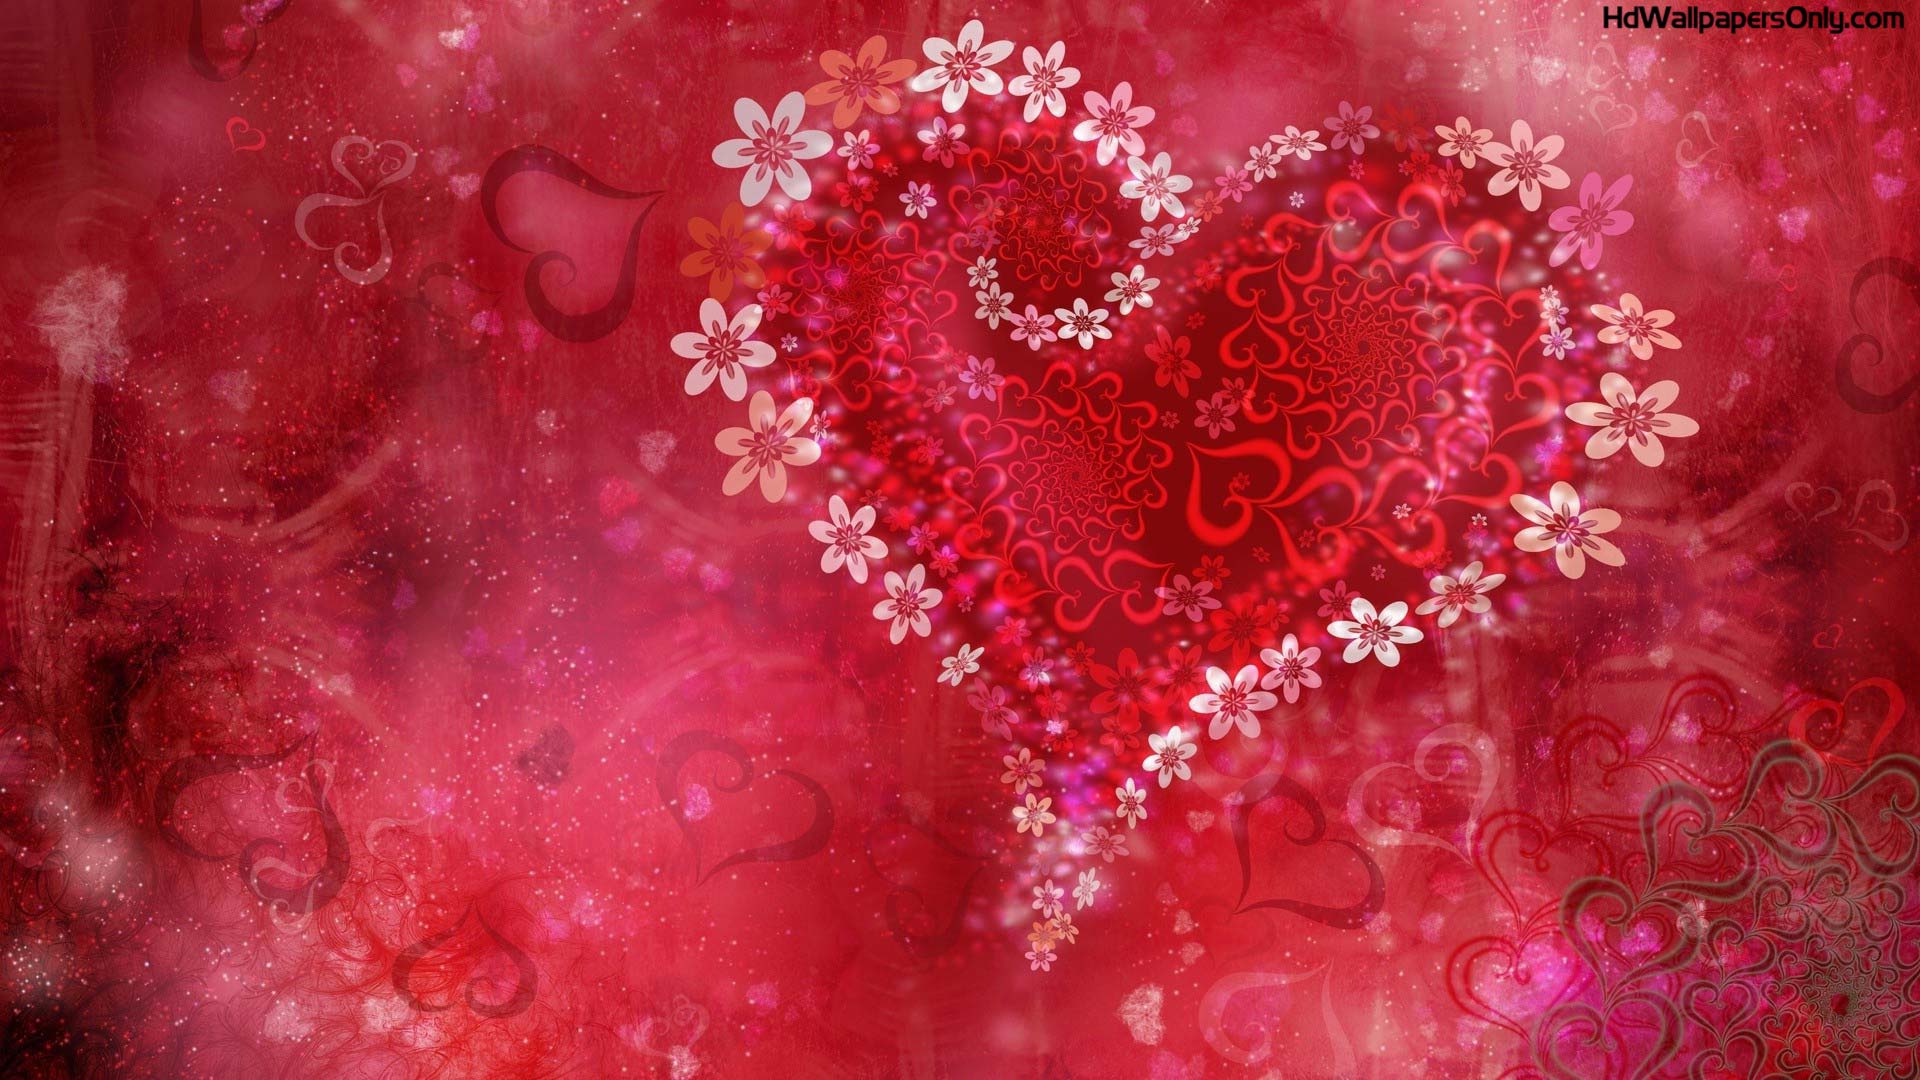 Heart Backgrounds Pictures